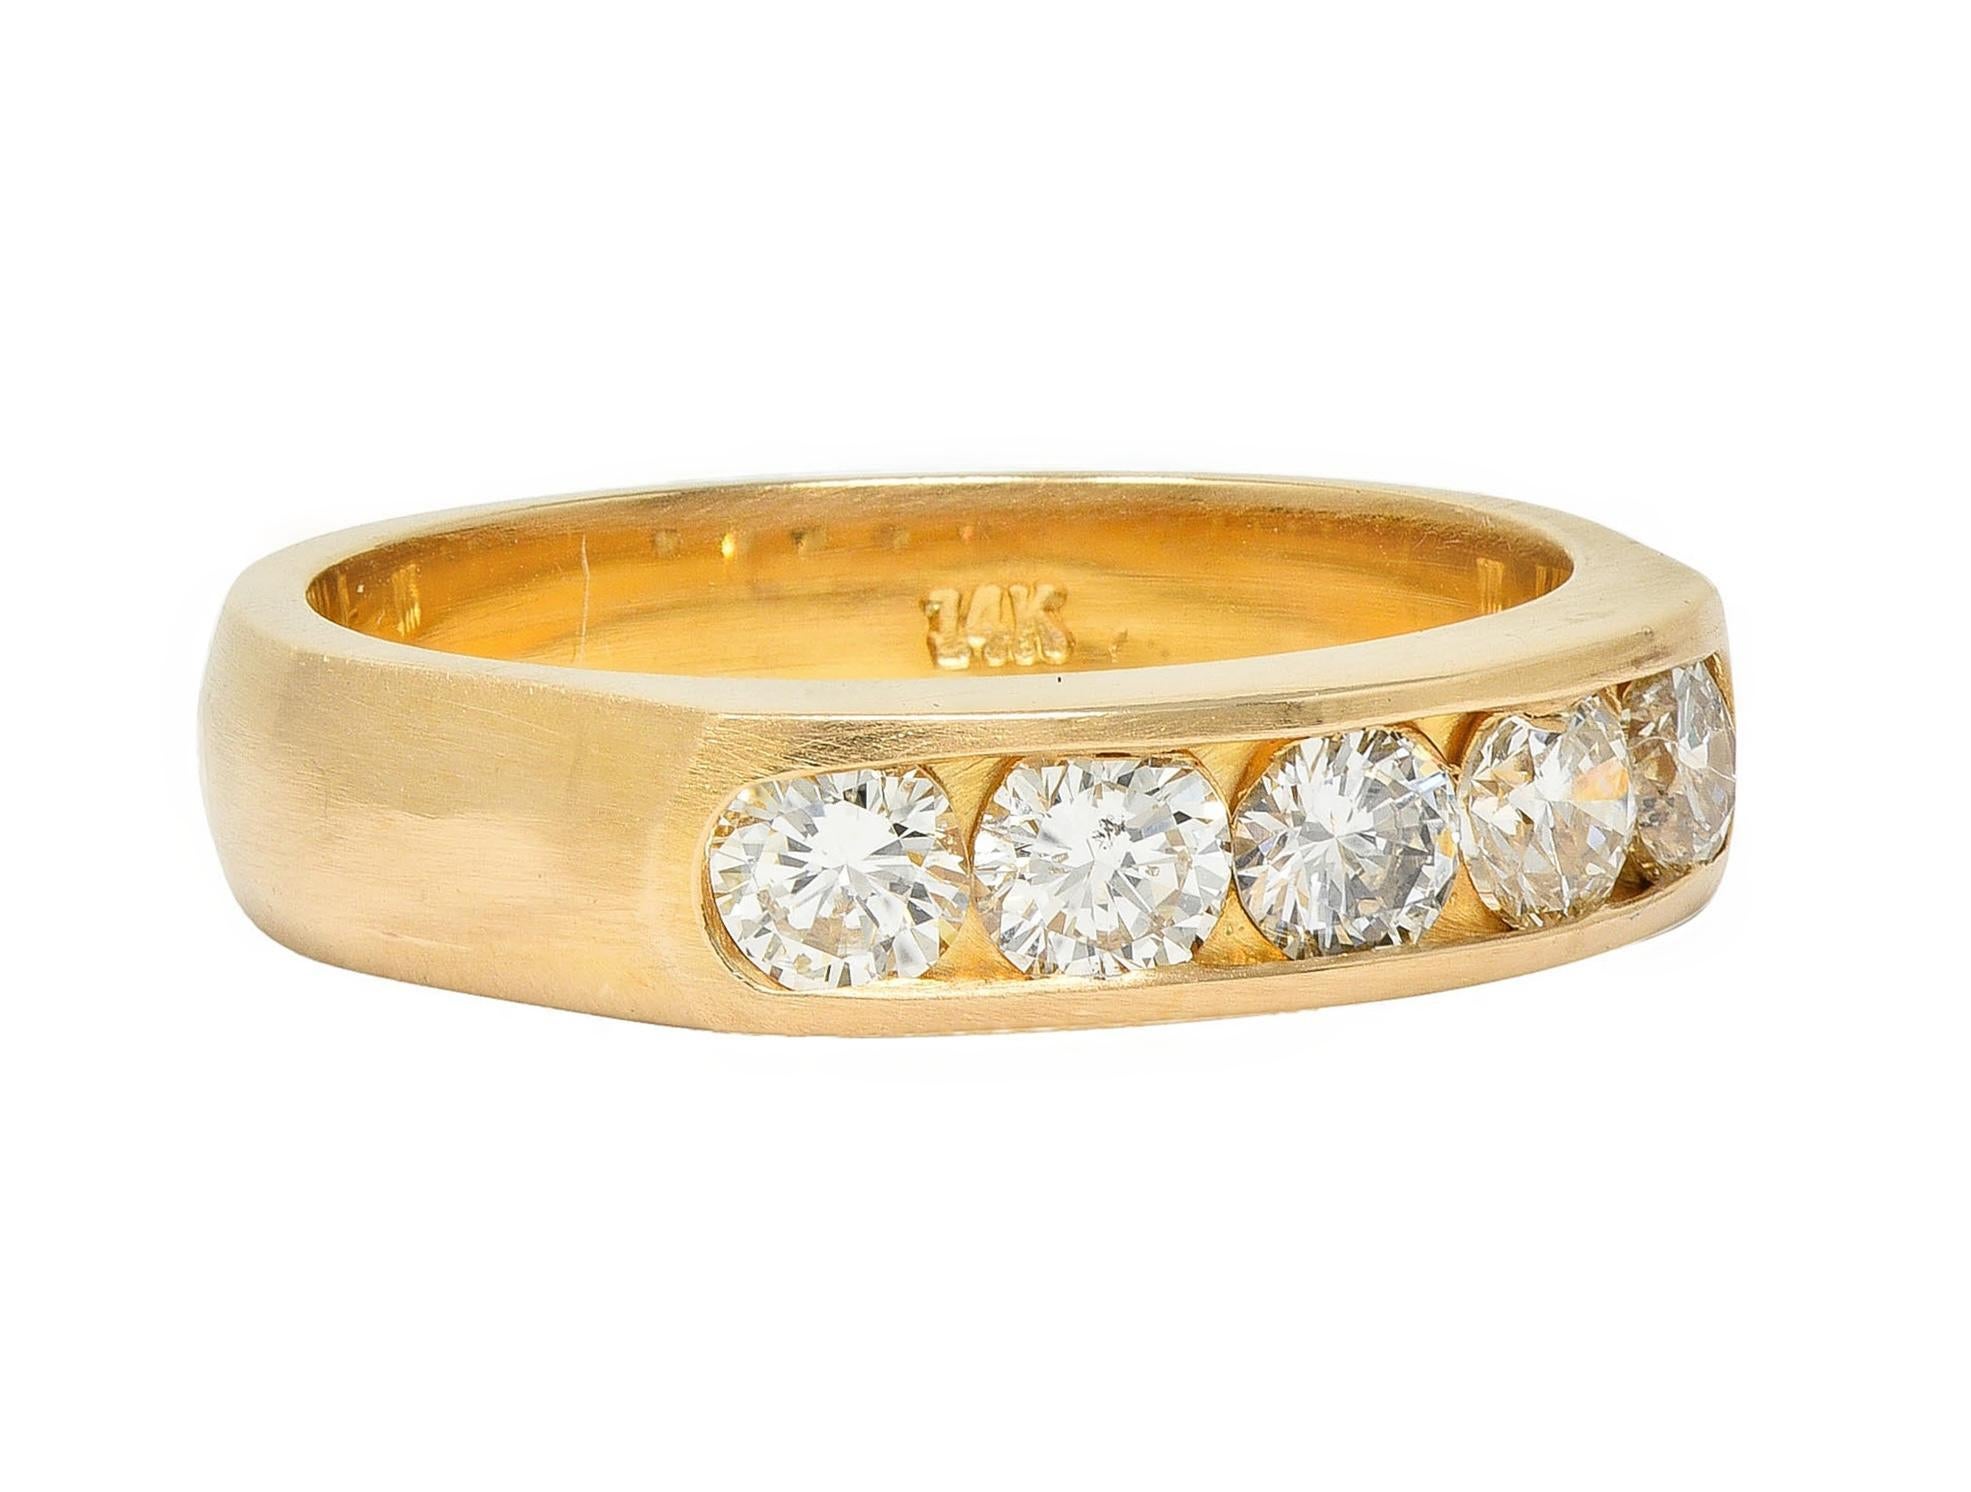 Centering five transitional cut diamonds channel set to front
Weighing approximately 0.80 carat total 
G color with VS2 clarity - flanked by flared shoulders
With a brushed matte finish 
Stamped for 14 karat gold 
Circa: 1960s
Ring size: 6 and